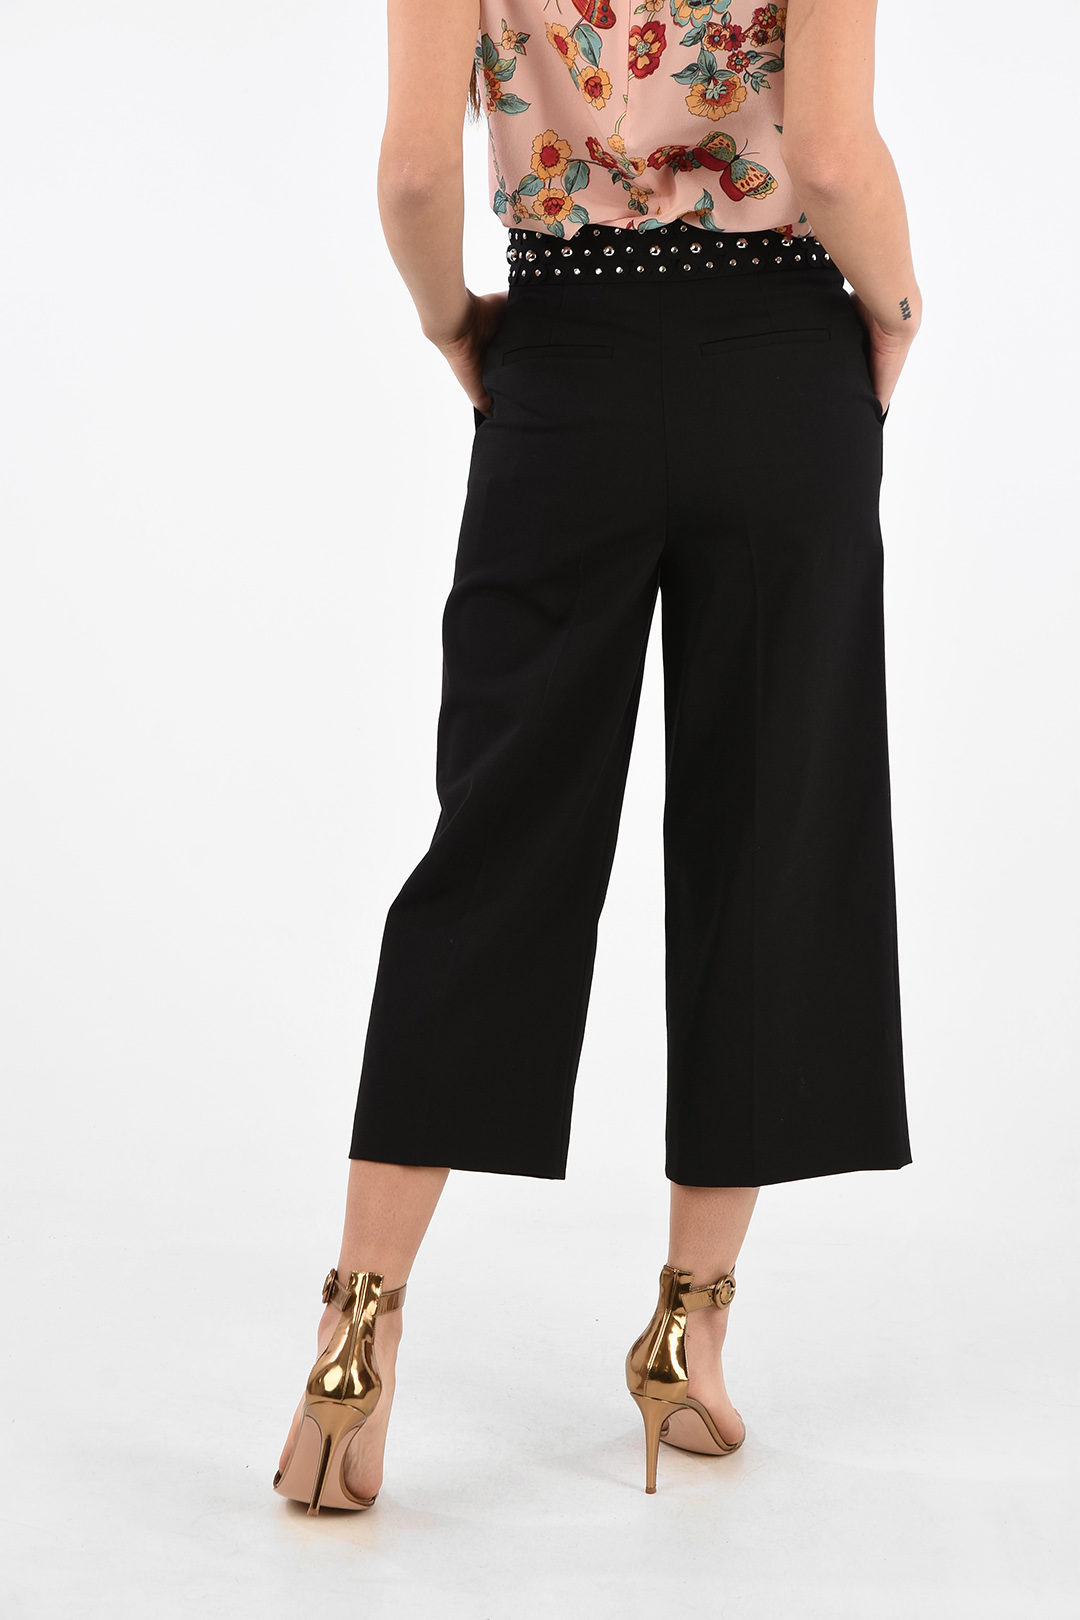 Red Valentino Cropped Palazzo Pants with Floral Applications women ...